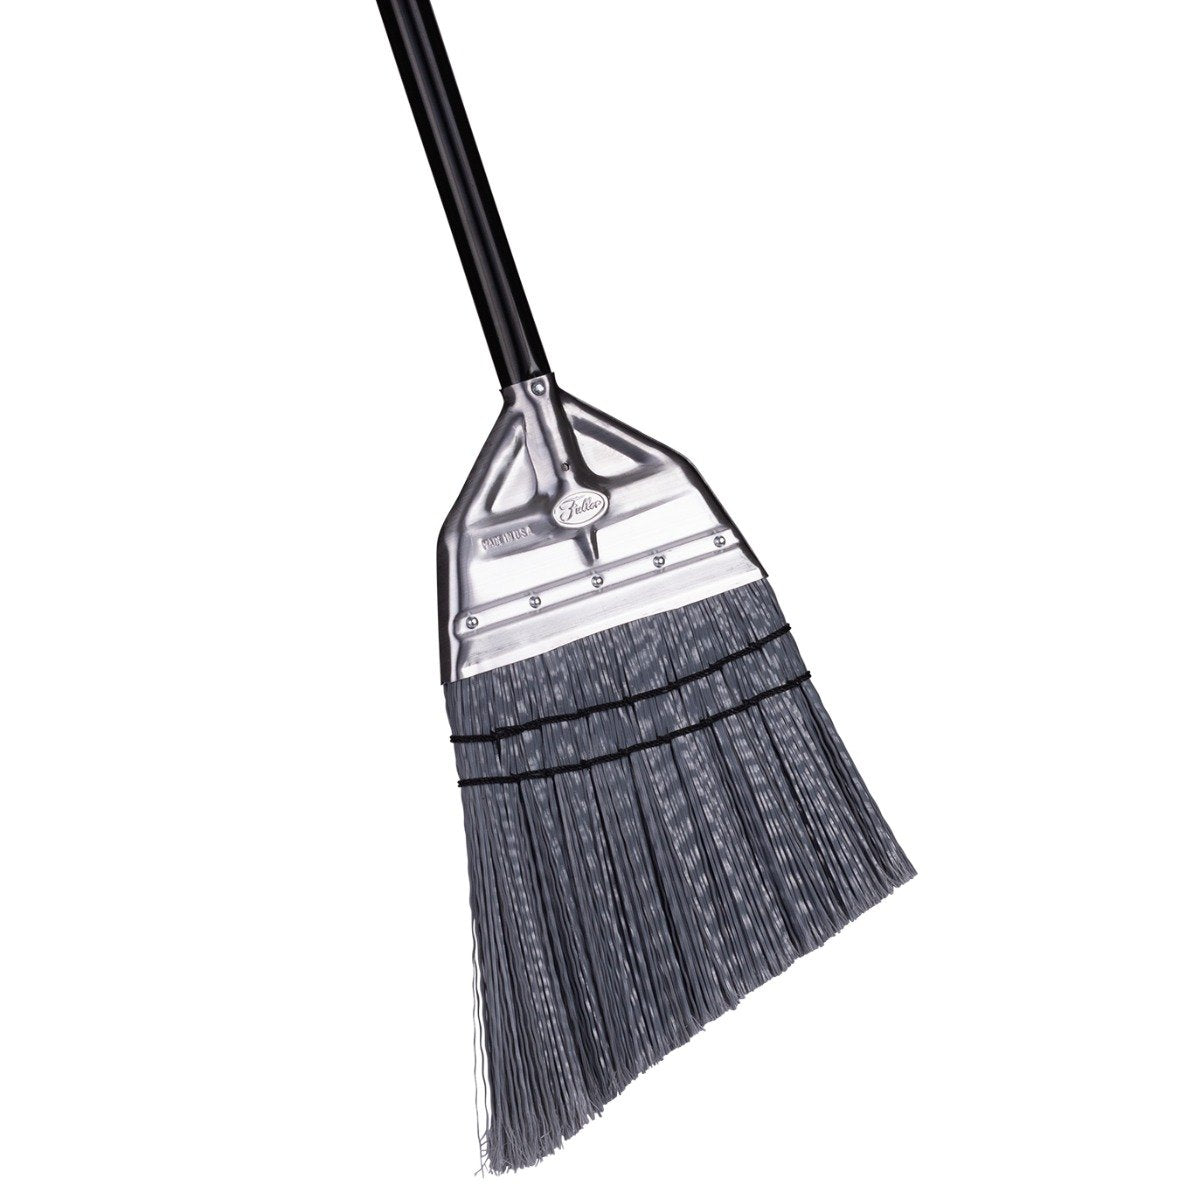 https://fuller.com/cdn/shop/products/house-of-fullerr-angle-broom-complete-9-12-sweeping-path-indoor-outdoor-use-brooms.jpg?v=1596015546